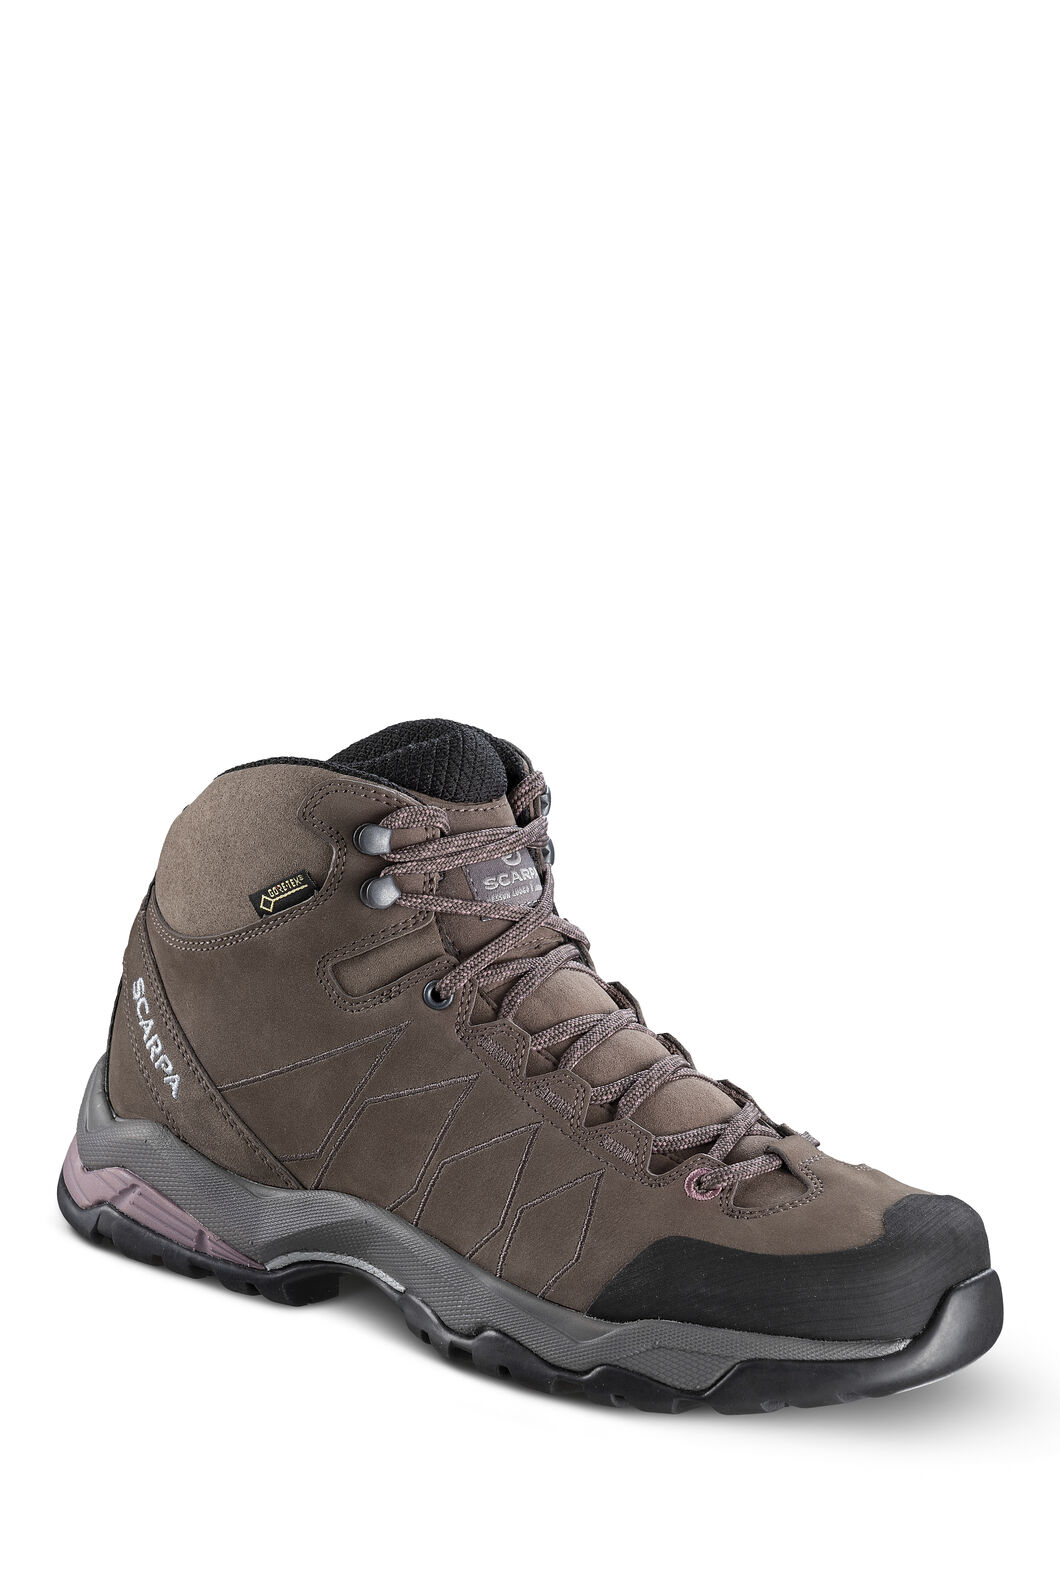 Storm Womens IsoGrip Waterproof Hiking Boots